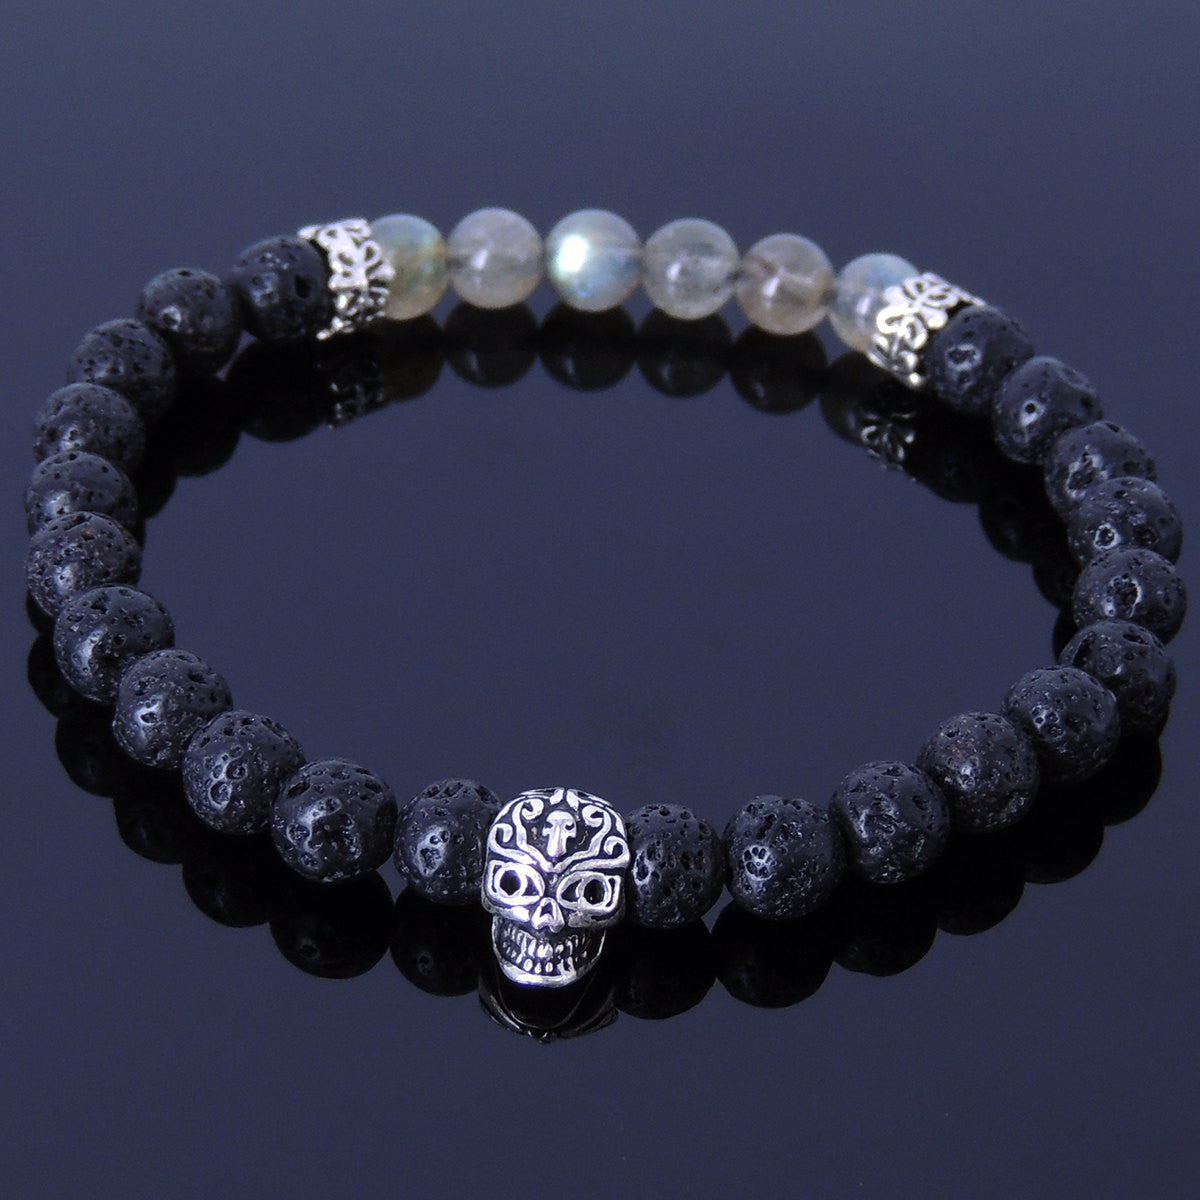 6mm Labradorite & Lava Rock Healing Gemstone Bracelet with S925 Sterling Silver Day of the Dead Skull Bead & Cross Spacers - Handmade by Gem & Silver BR315